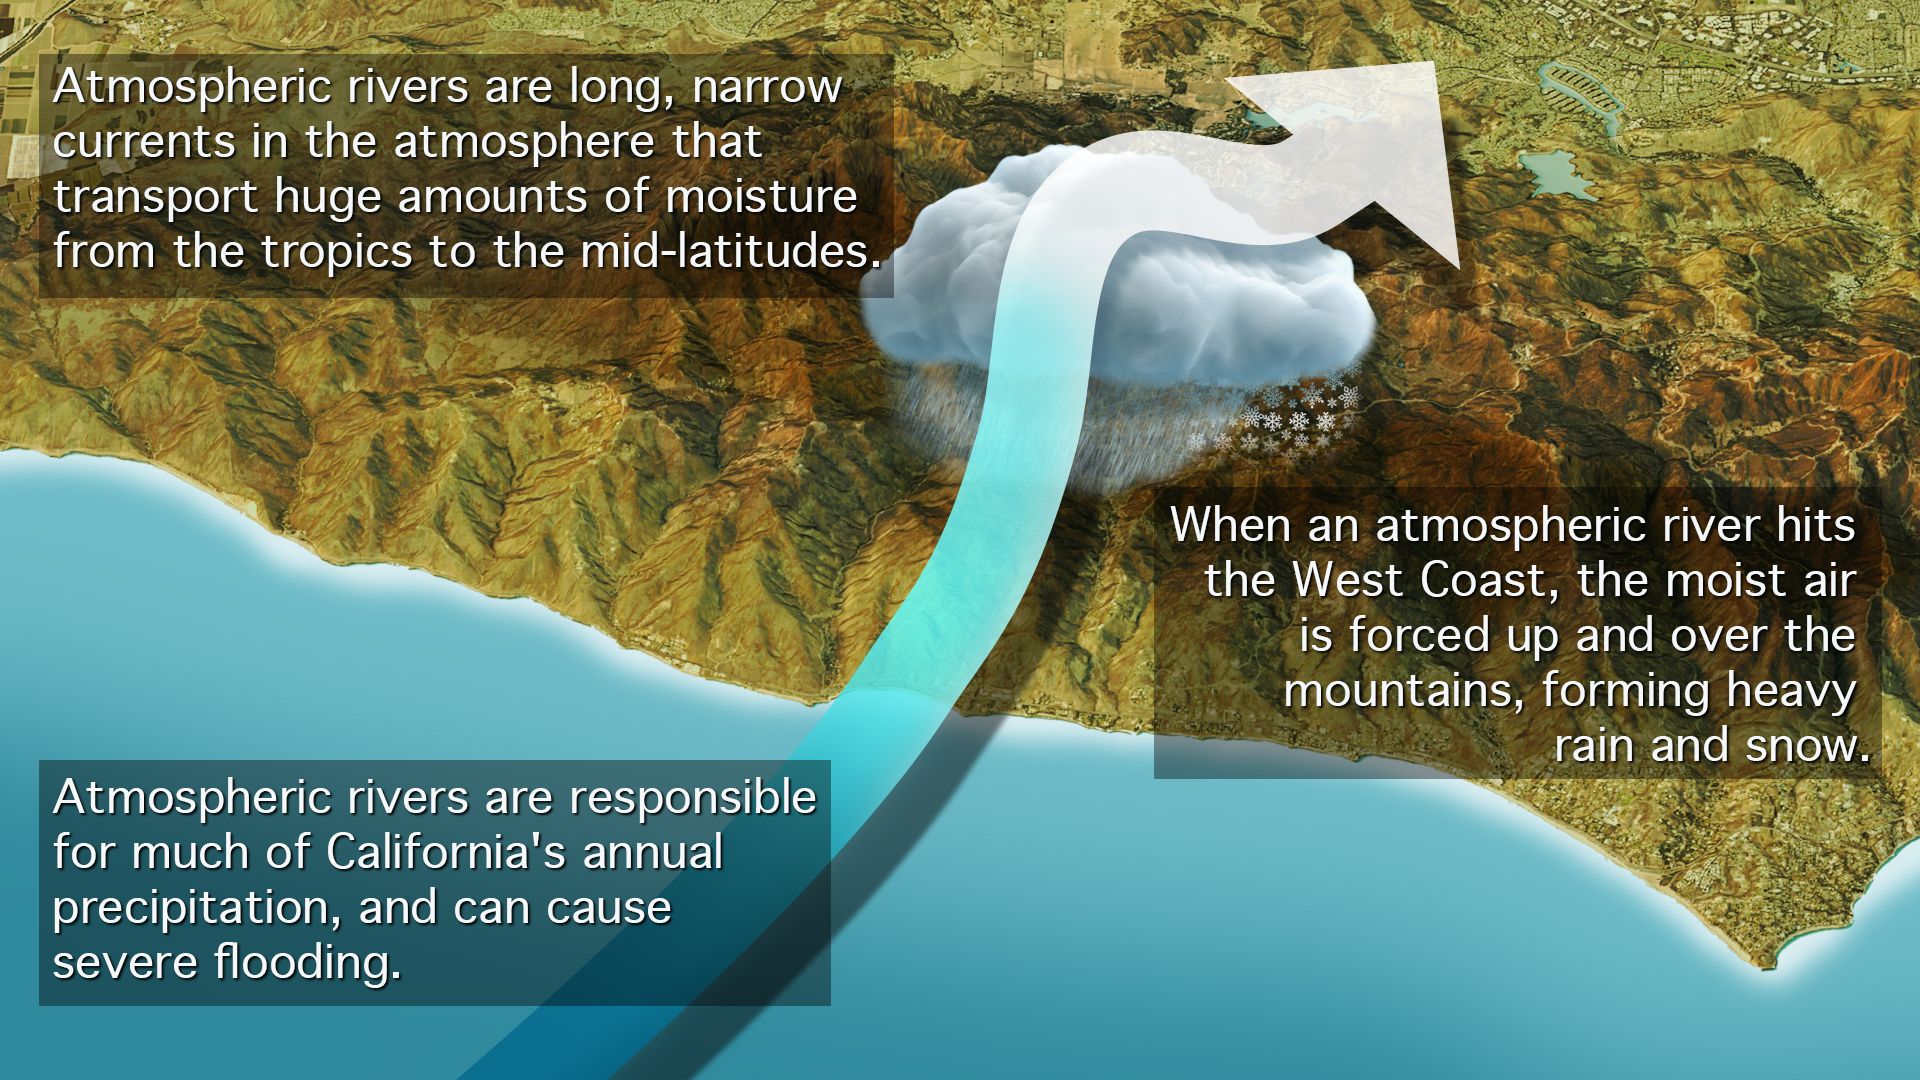 Diagram of an atmospheric river with explanatory text on how they work.